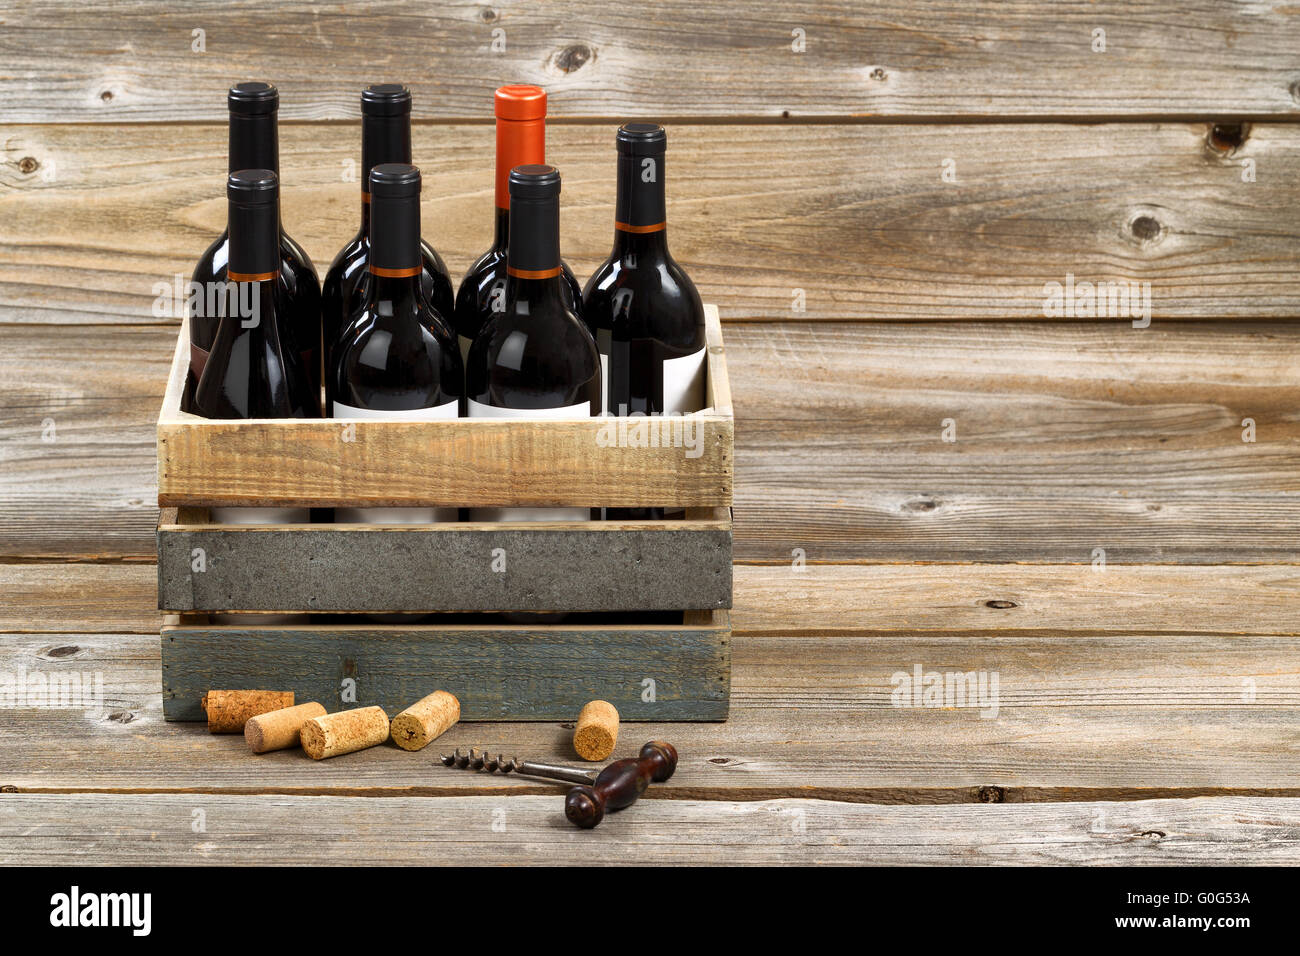 Bottles of red wine in wooden crate on rustic wooden boards Stock Photo